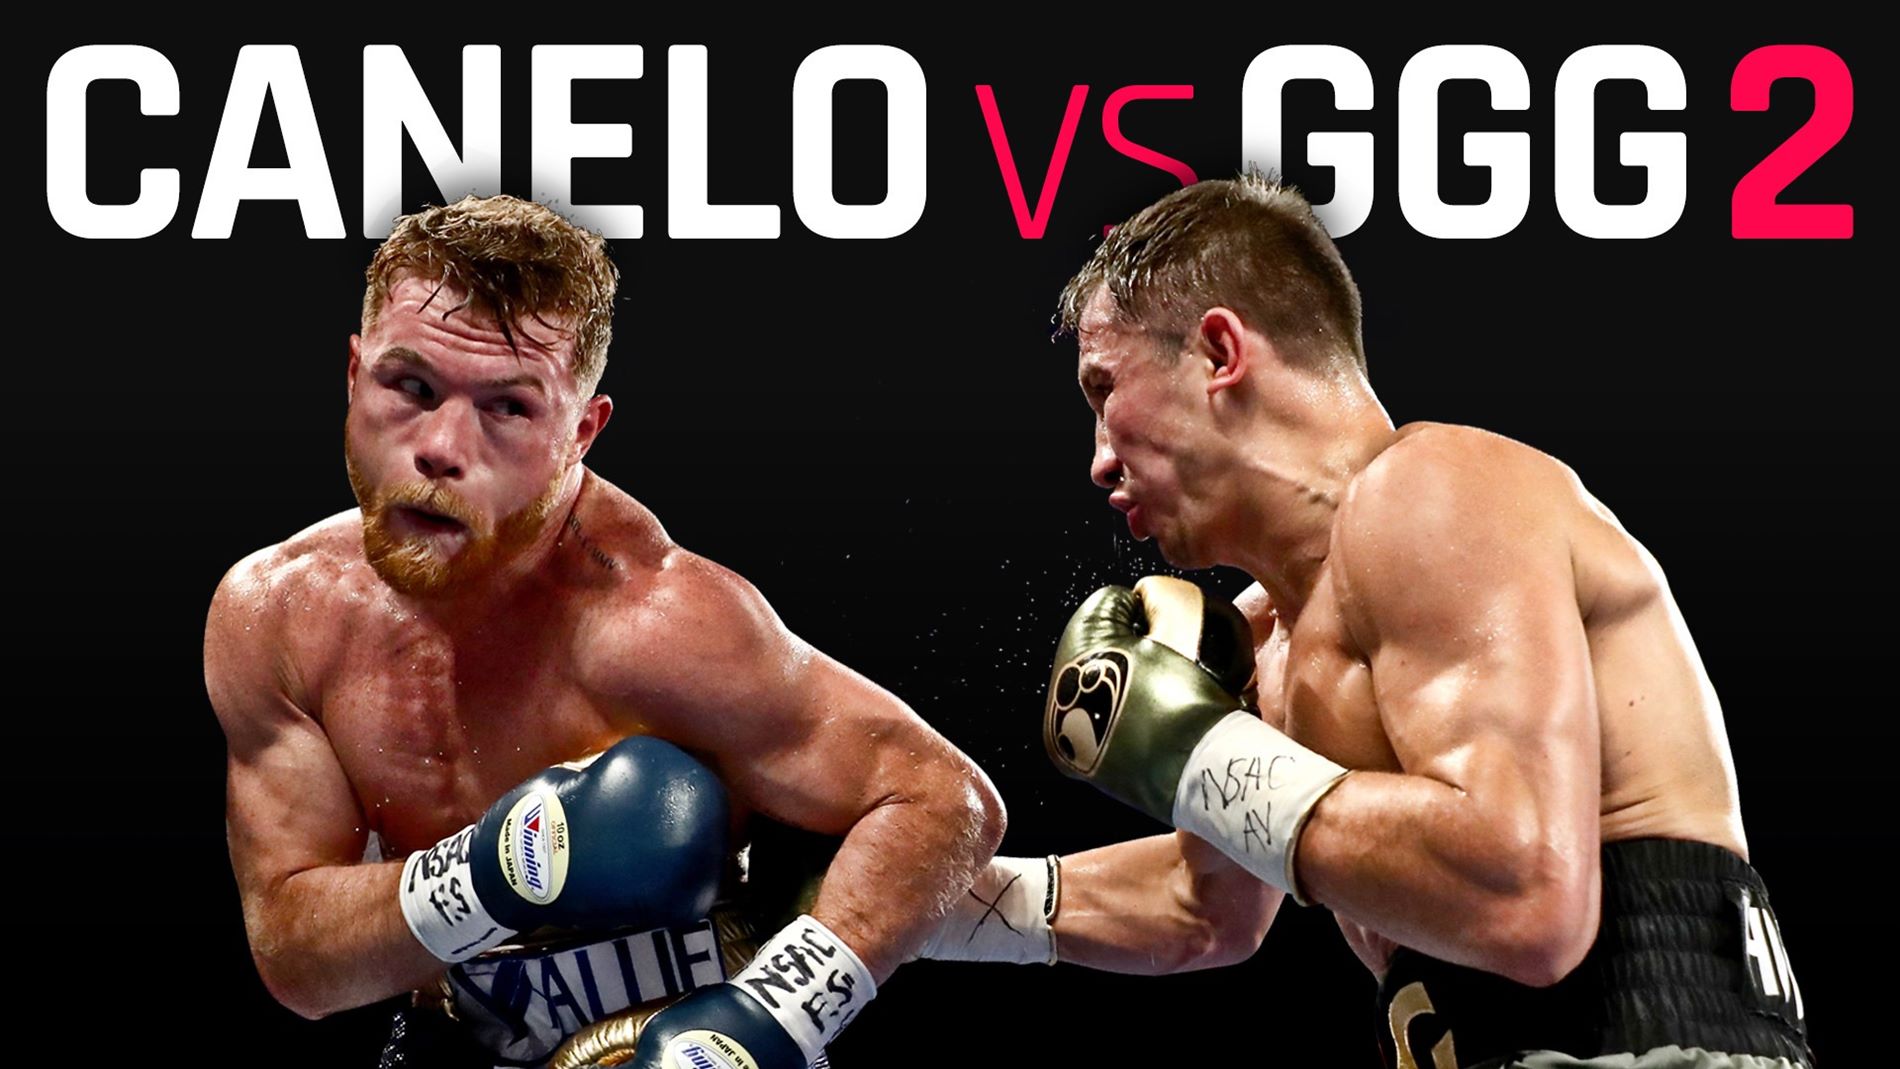 How To Watch Canelo Vs Ggg 2